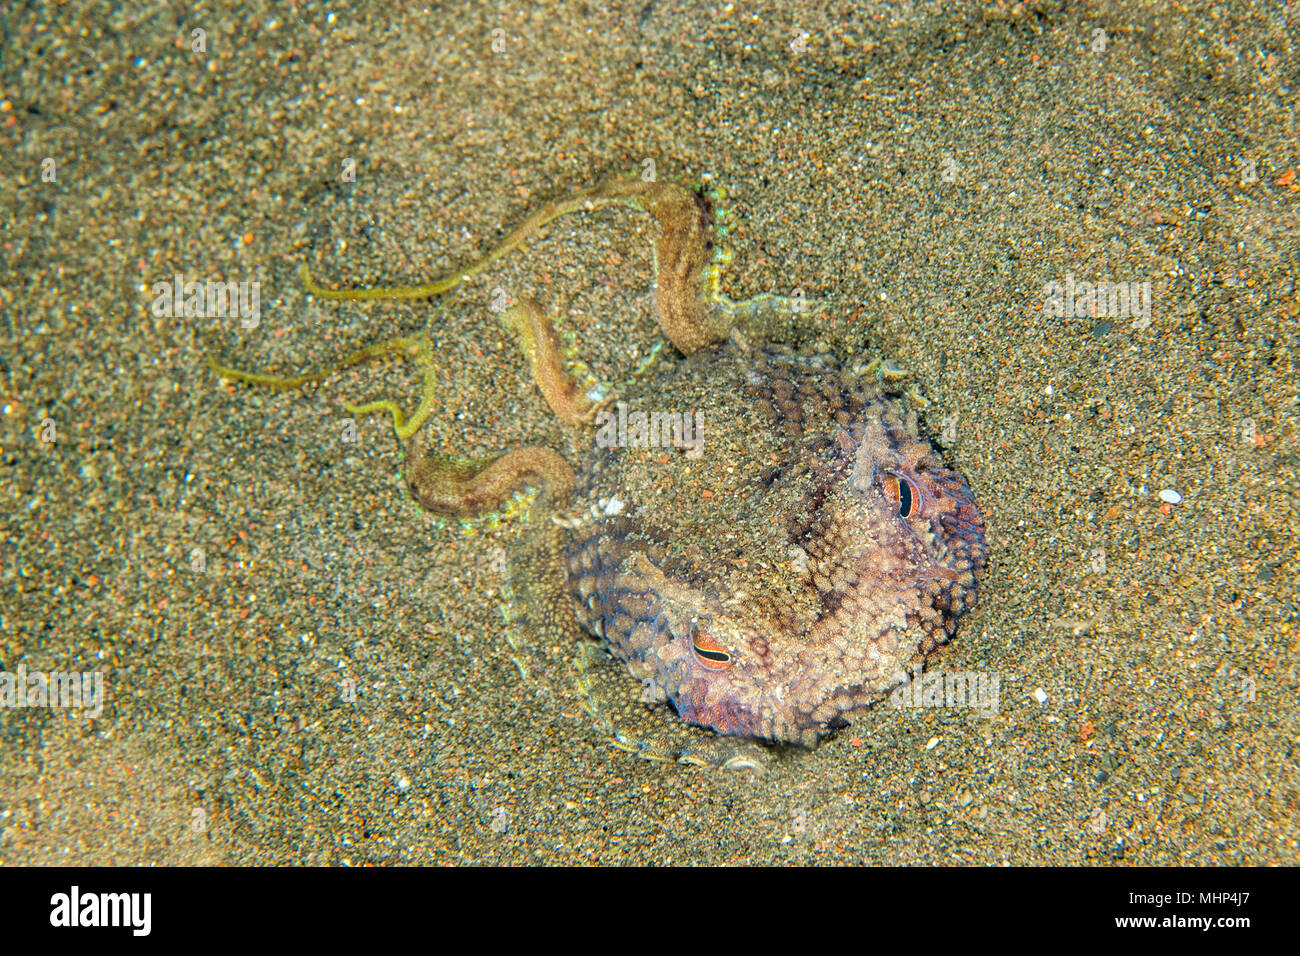 coconut octopus on sand background while diving in Indonesia Stock Photo